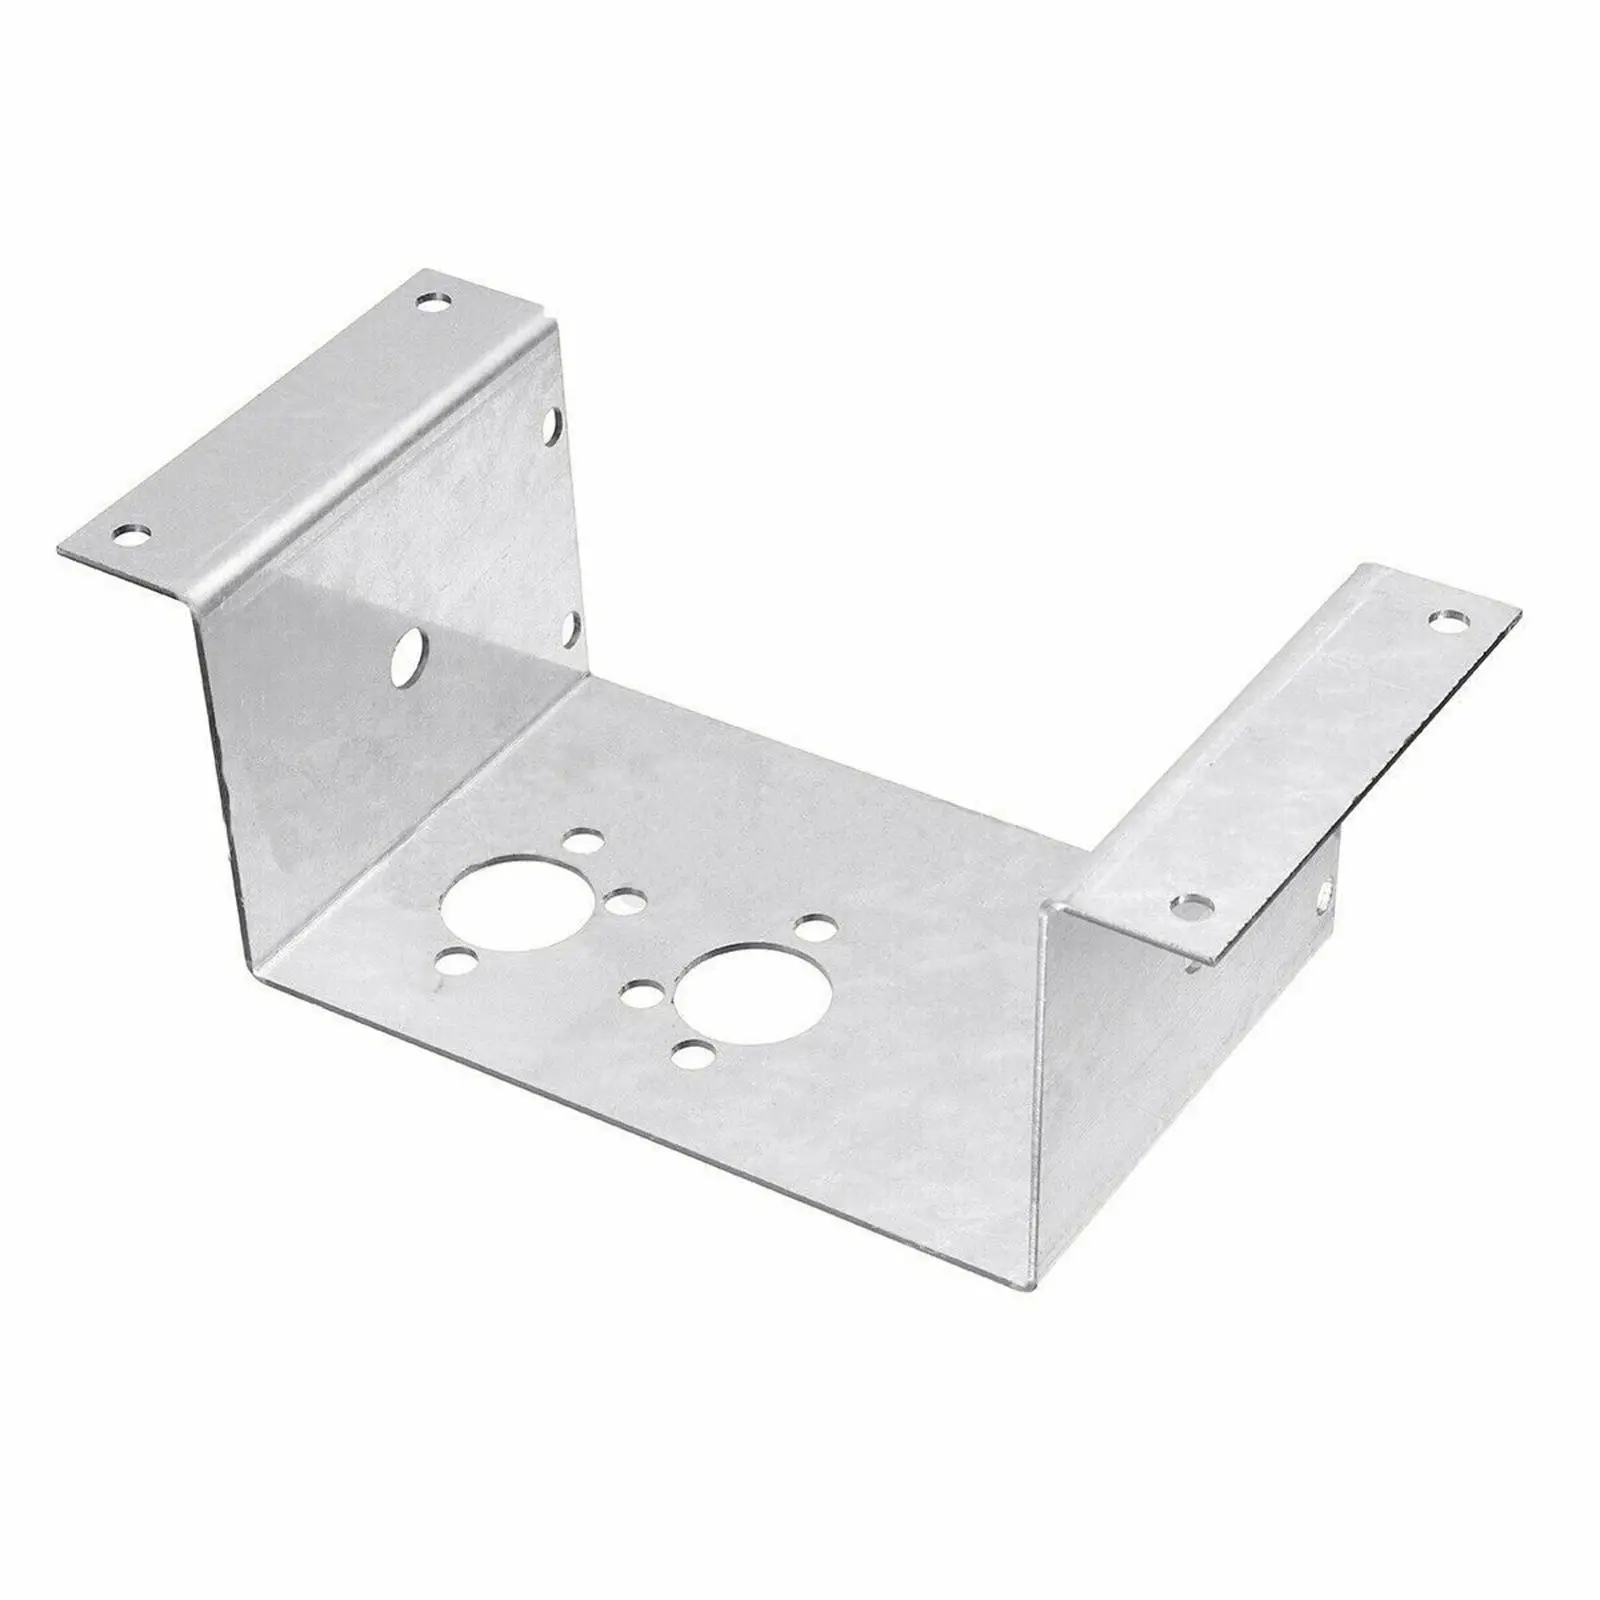 Universal Base Mounting Bracket Diesel Air Heater Fit for Car Accessories